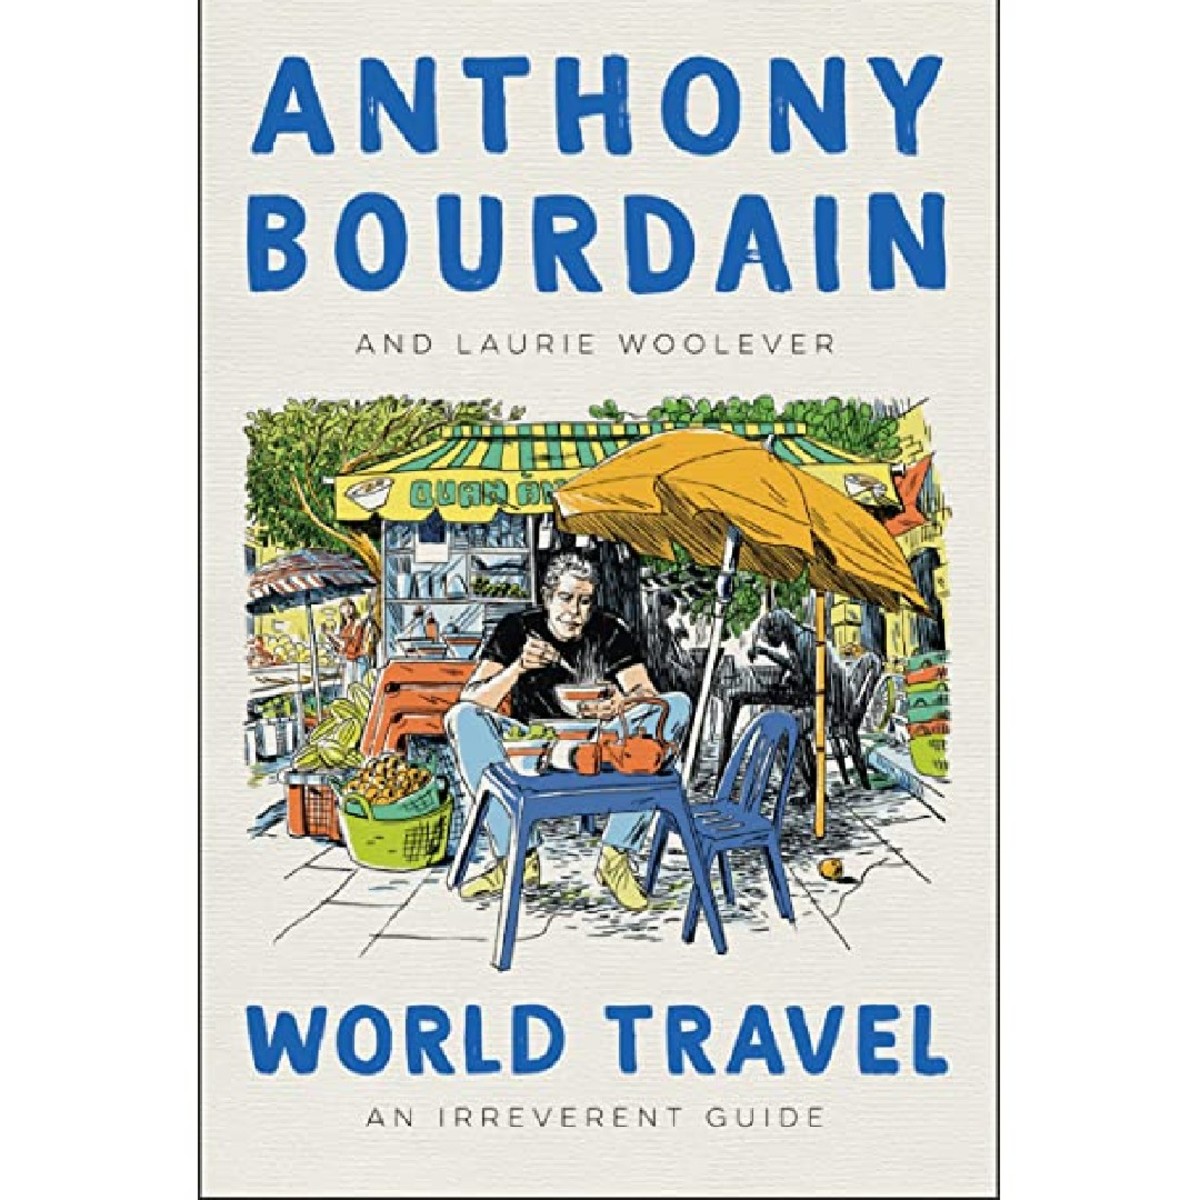 'World Travel: An Irreverent Guide' by Anthony Bourdain and Laurie Woolever